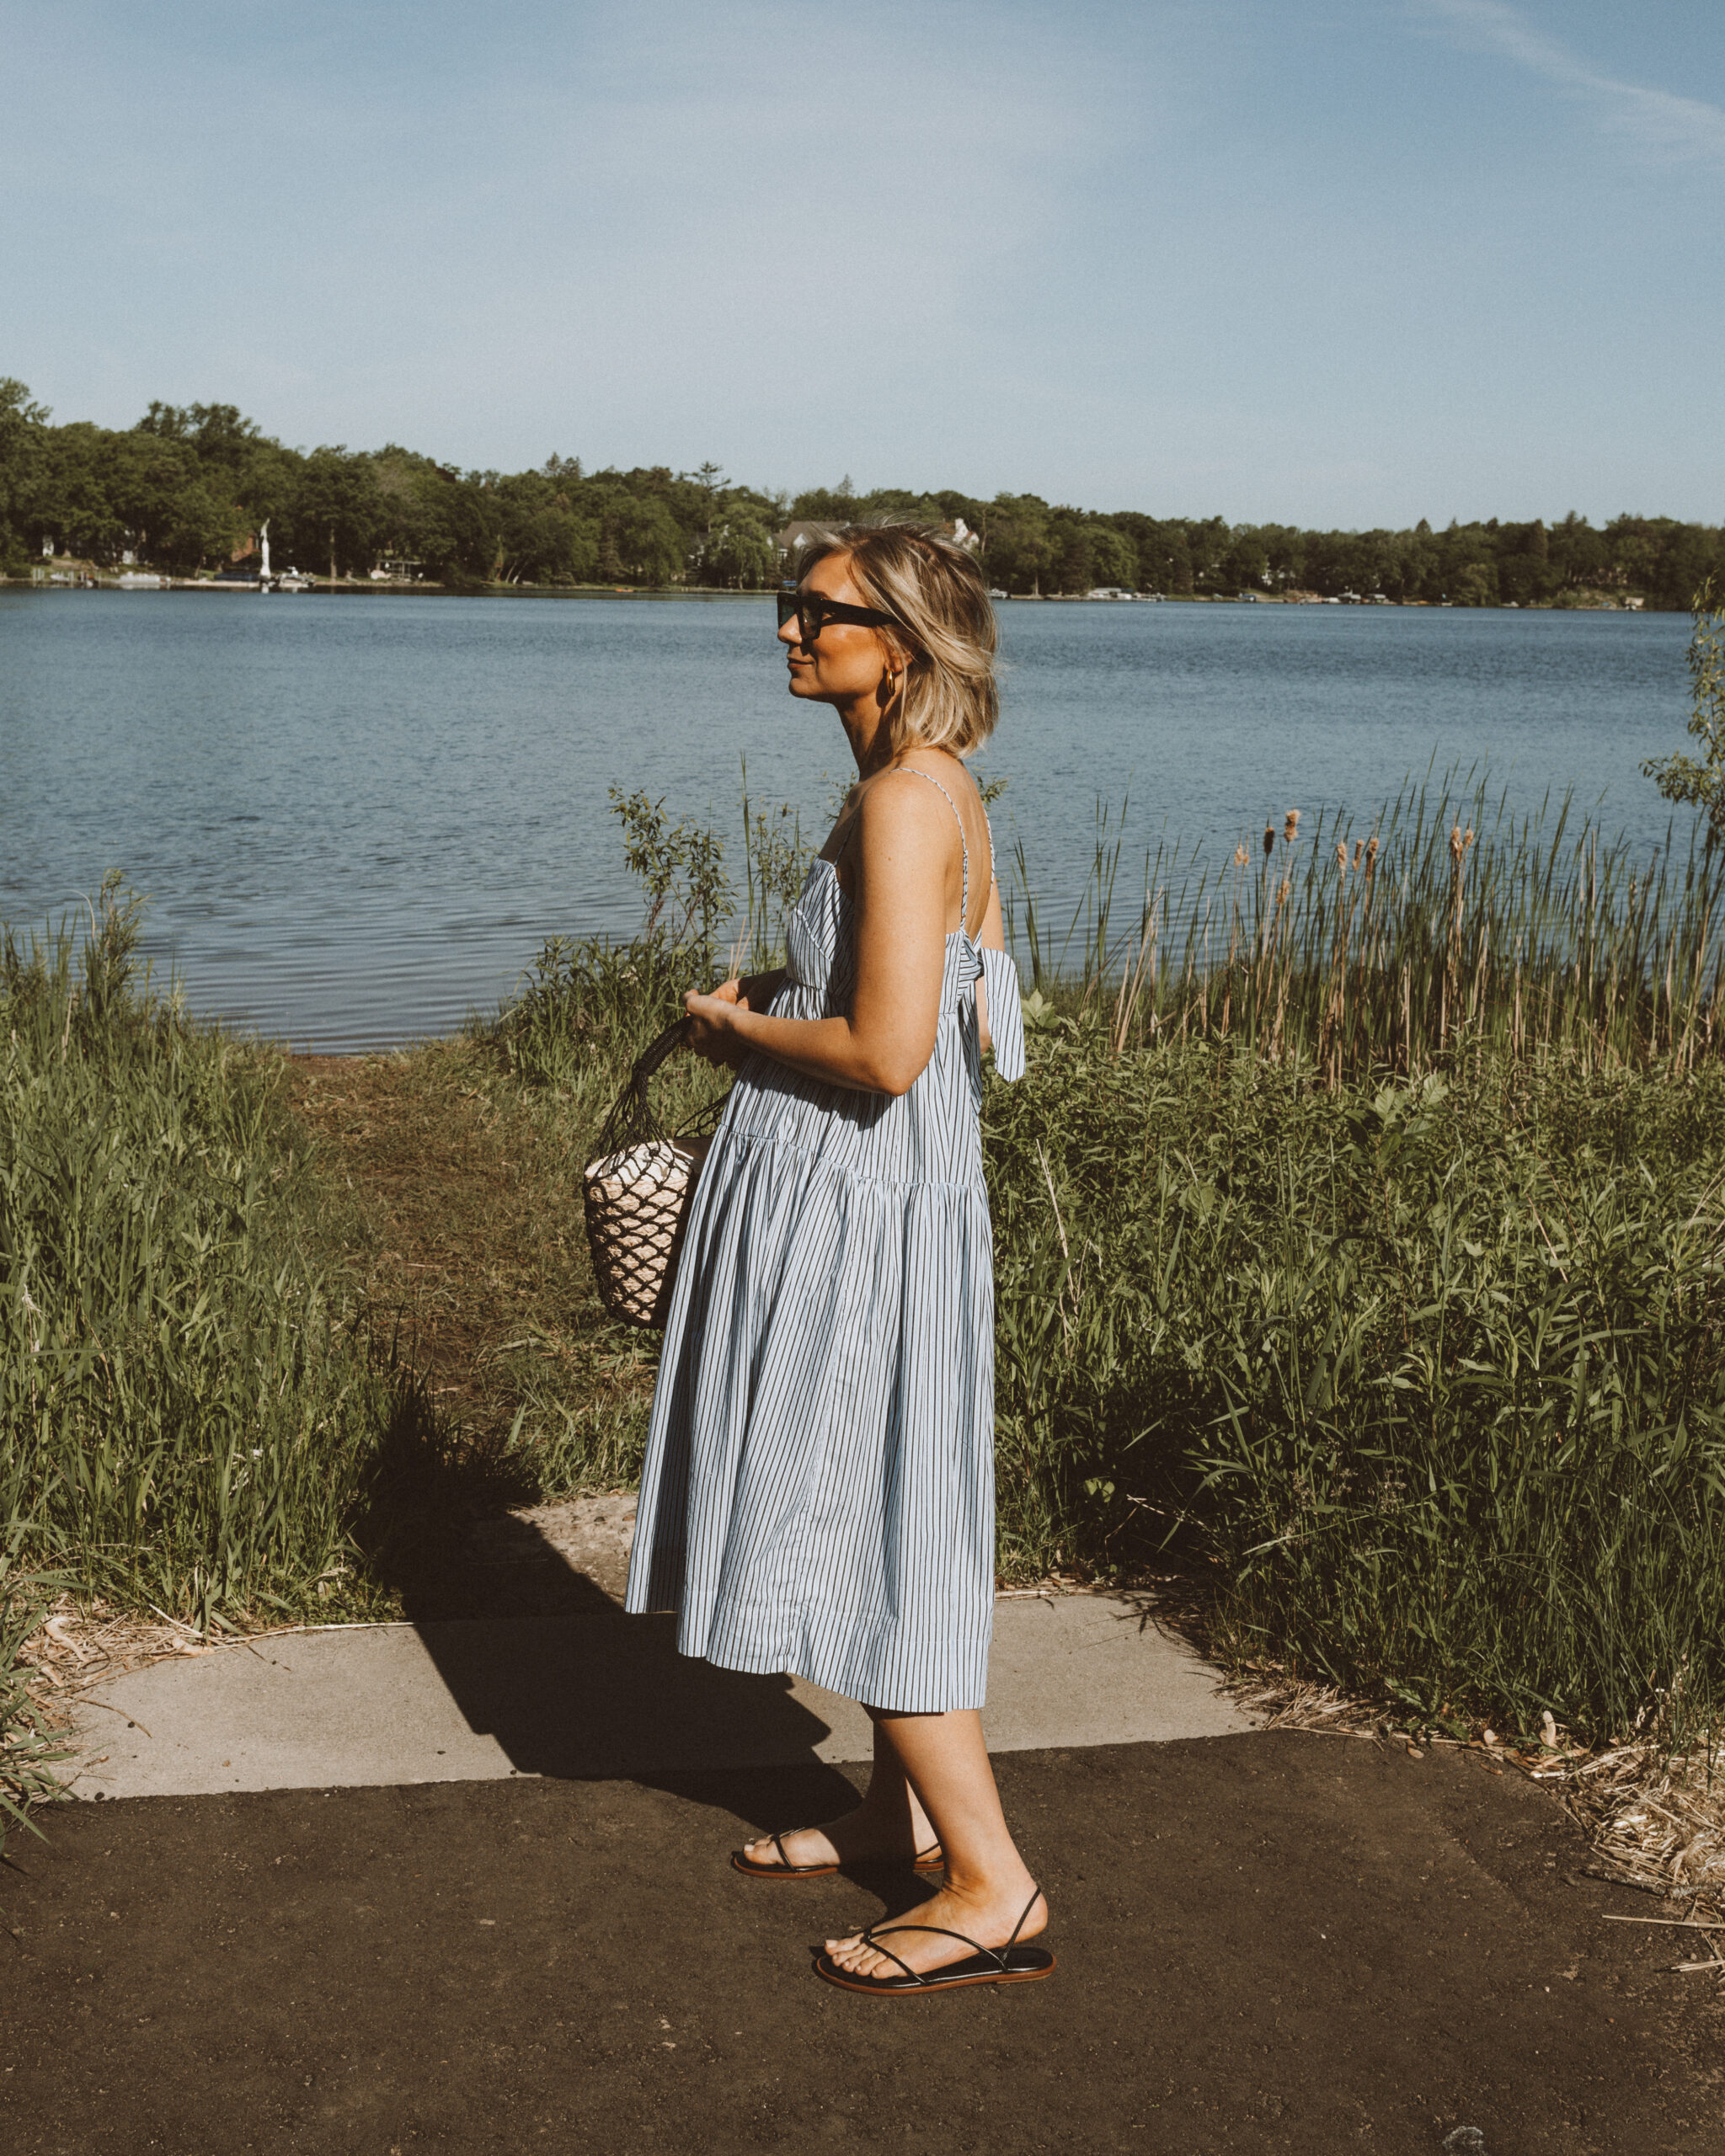 Karin Emily wears a vacation ready outfit: blue and white striped sundress from J. Crew